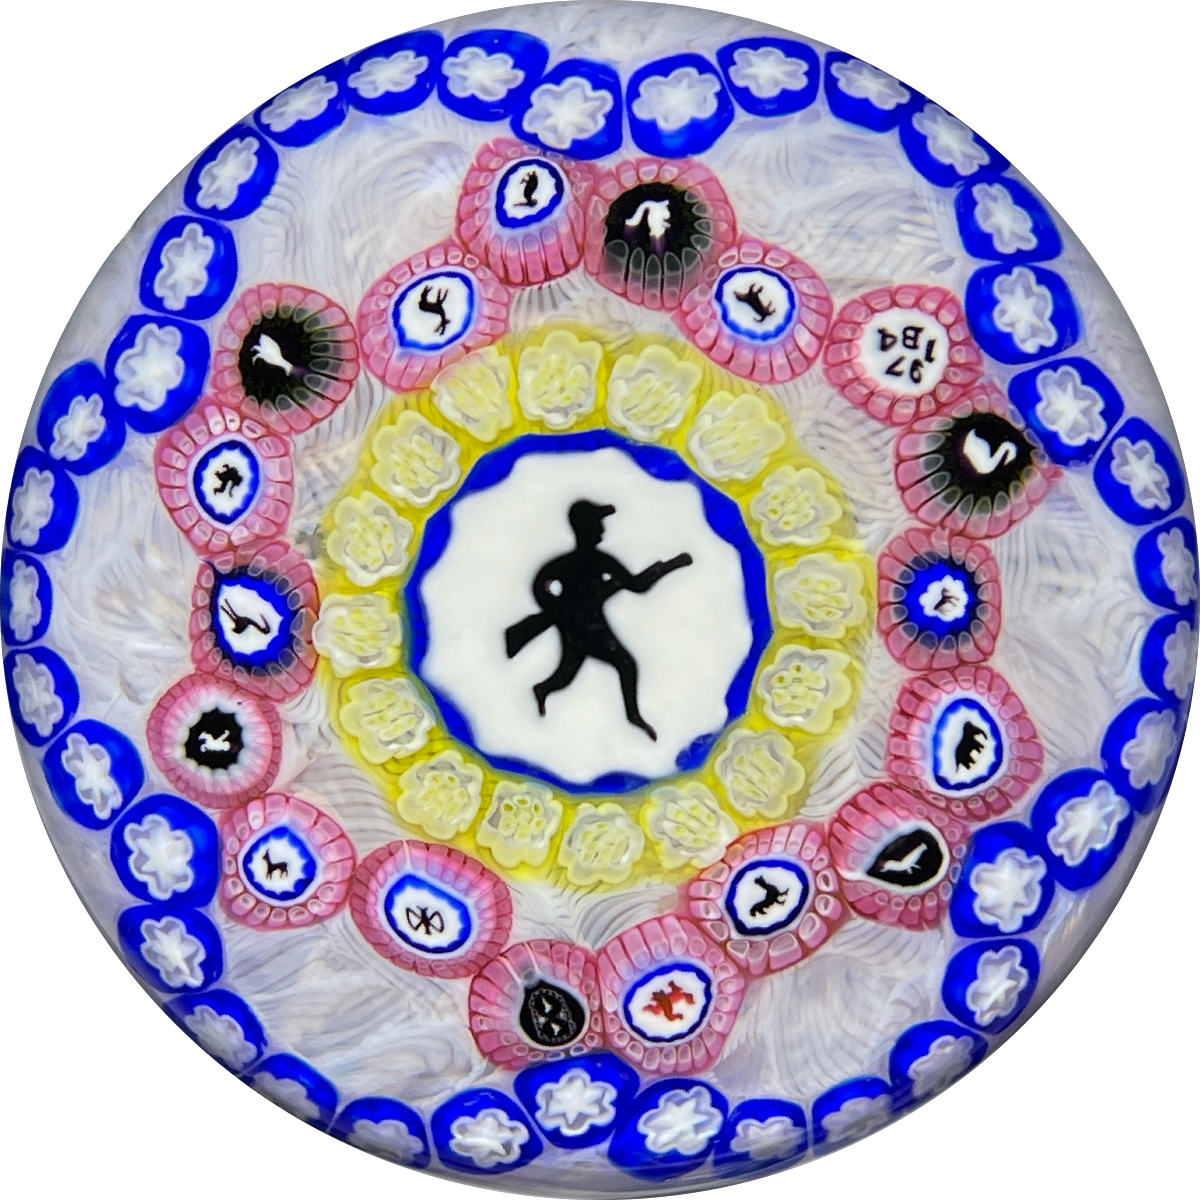 Baccarat Crystal 1974 L'Homme Au Fusil Gridel Hunter with Rifle Murrine Interlaced Complex Millefiori Garland & 17 Silhouettes on Upset White Muslin Lace